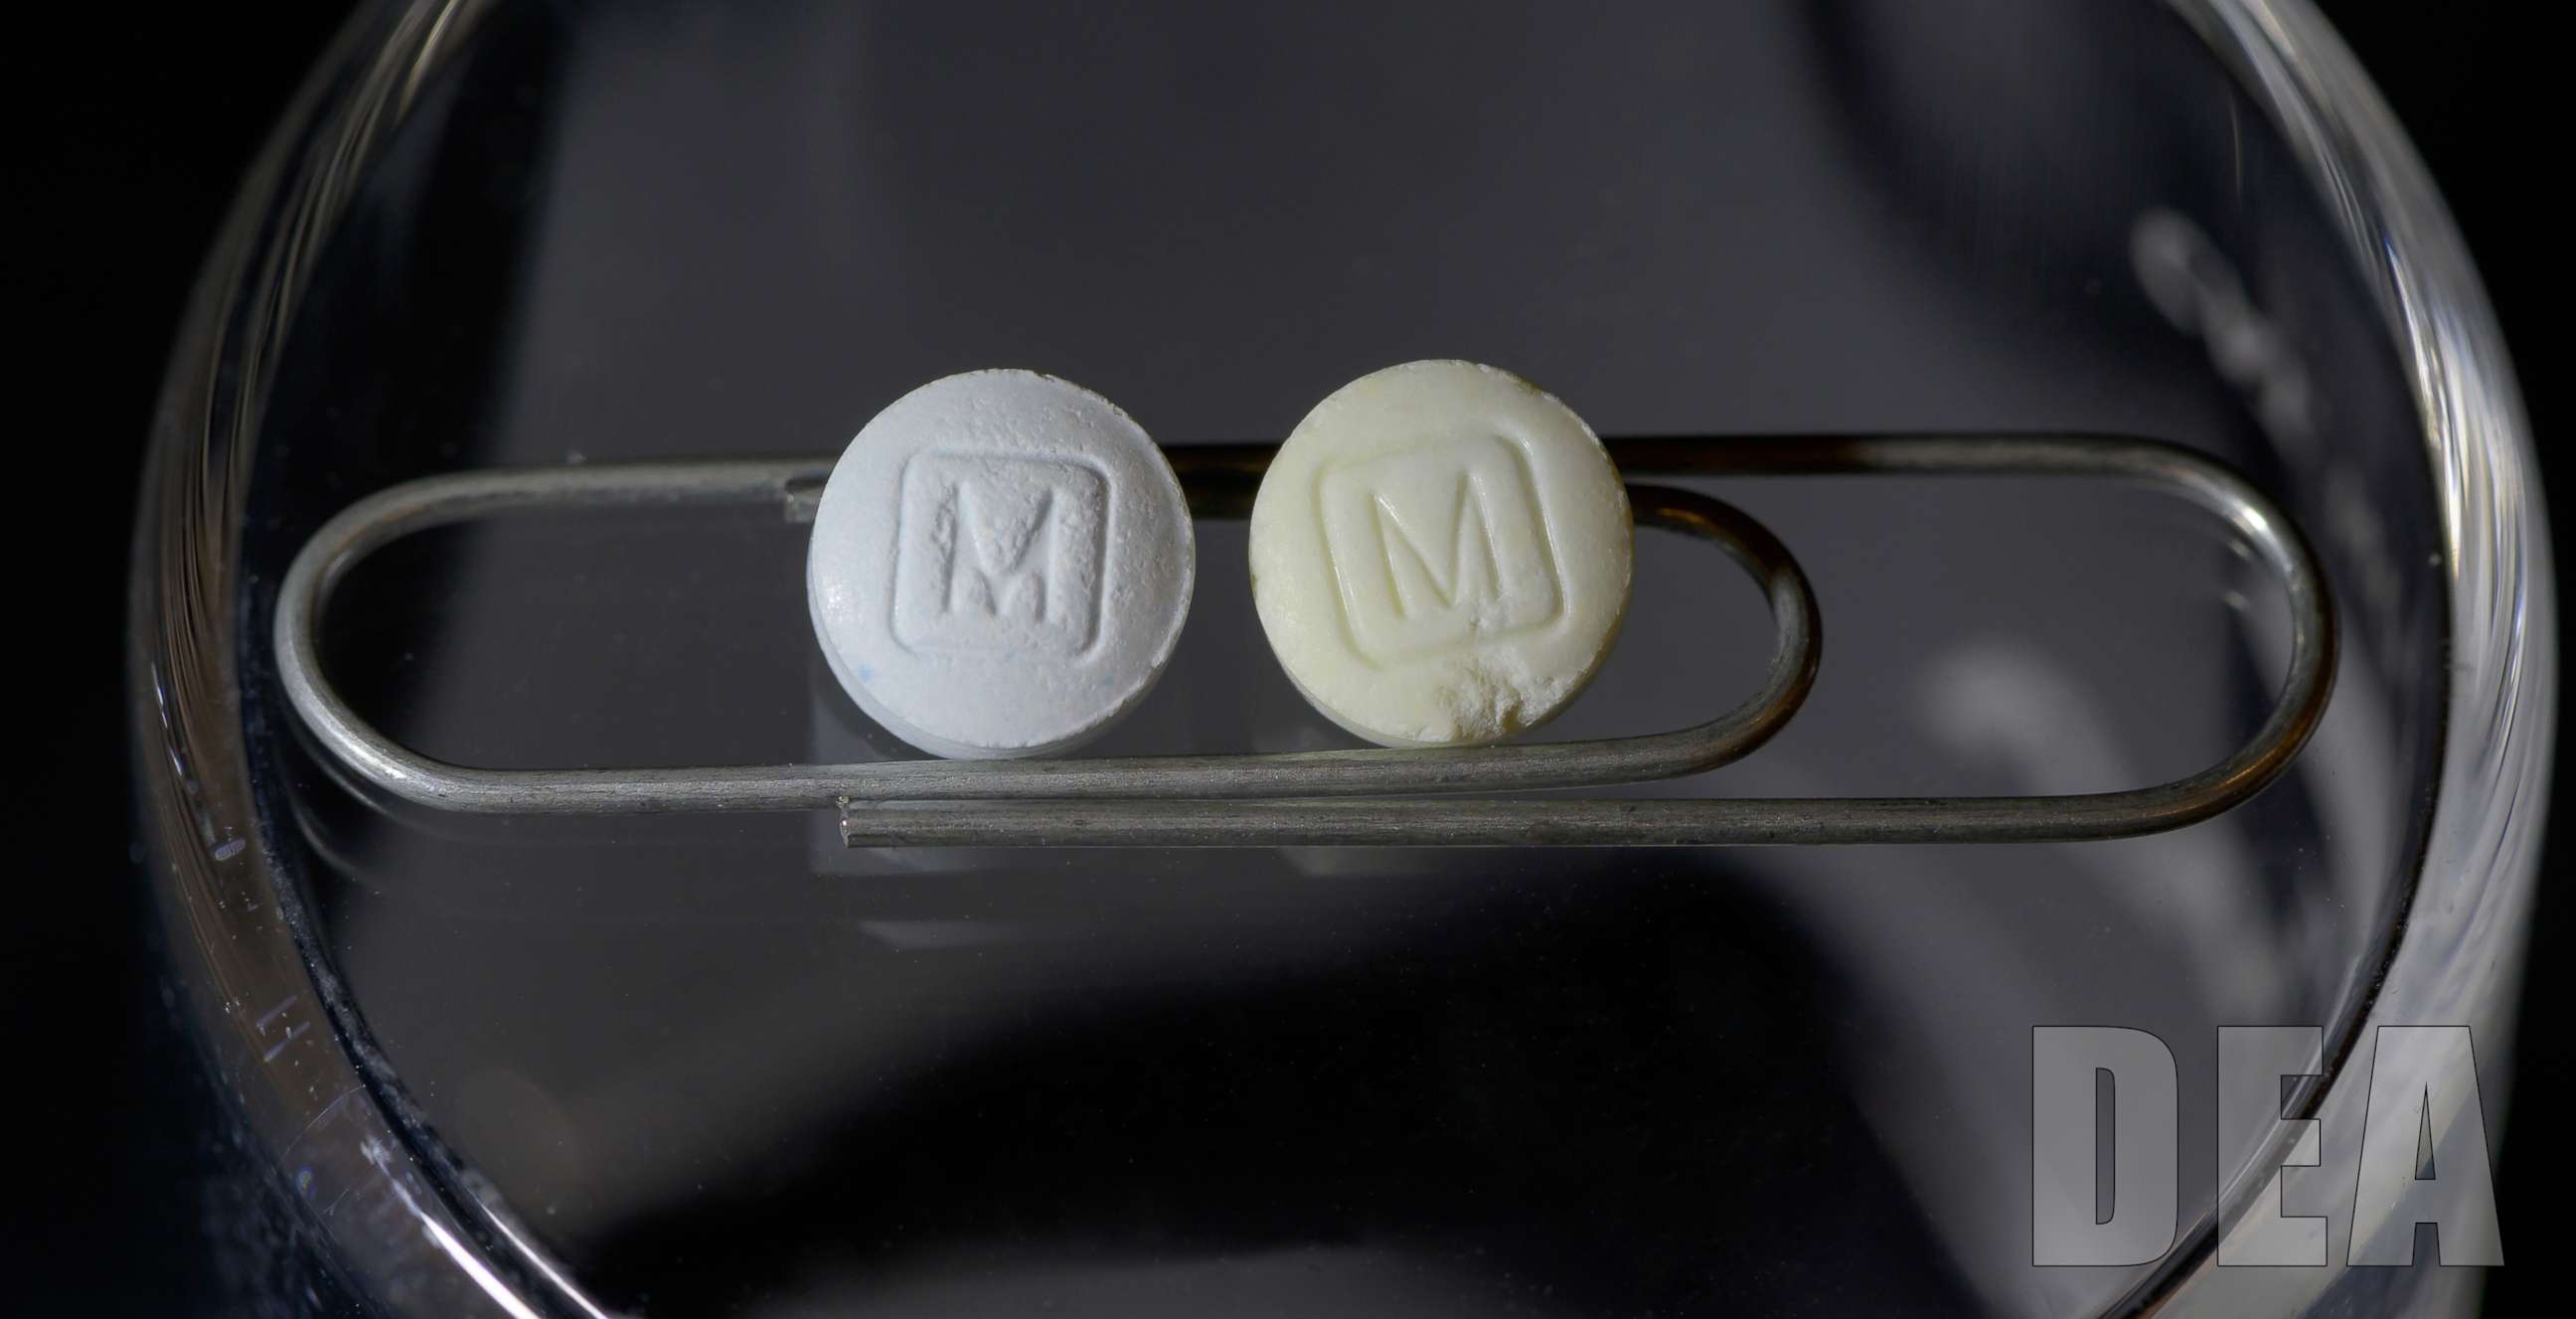 PHOTO: 30mg Authentic and Counterfeit Oxycodone.